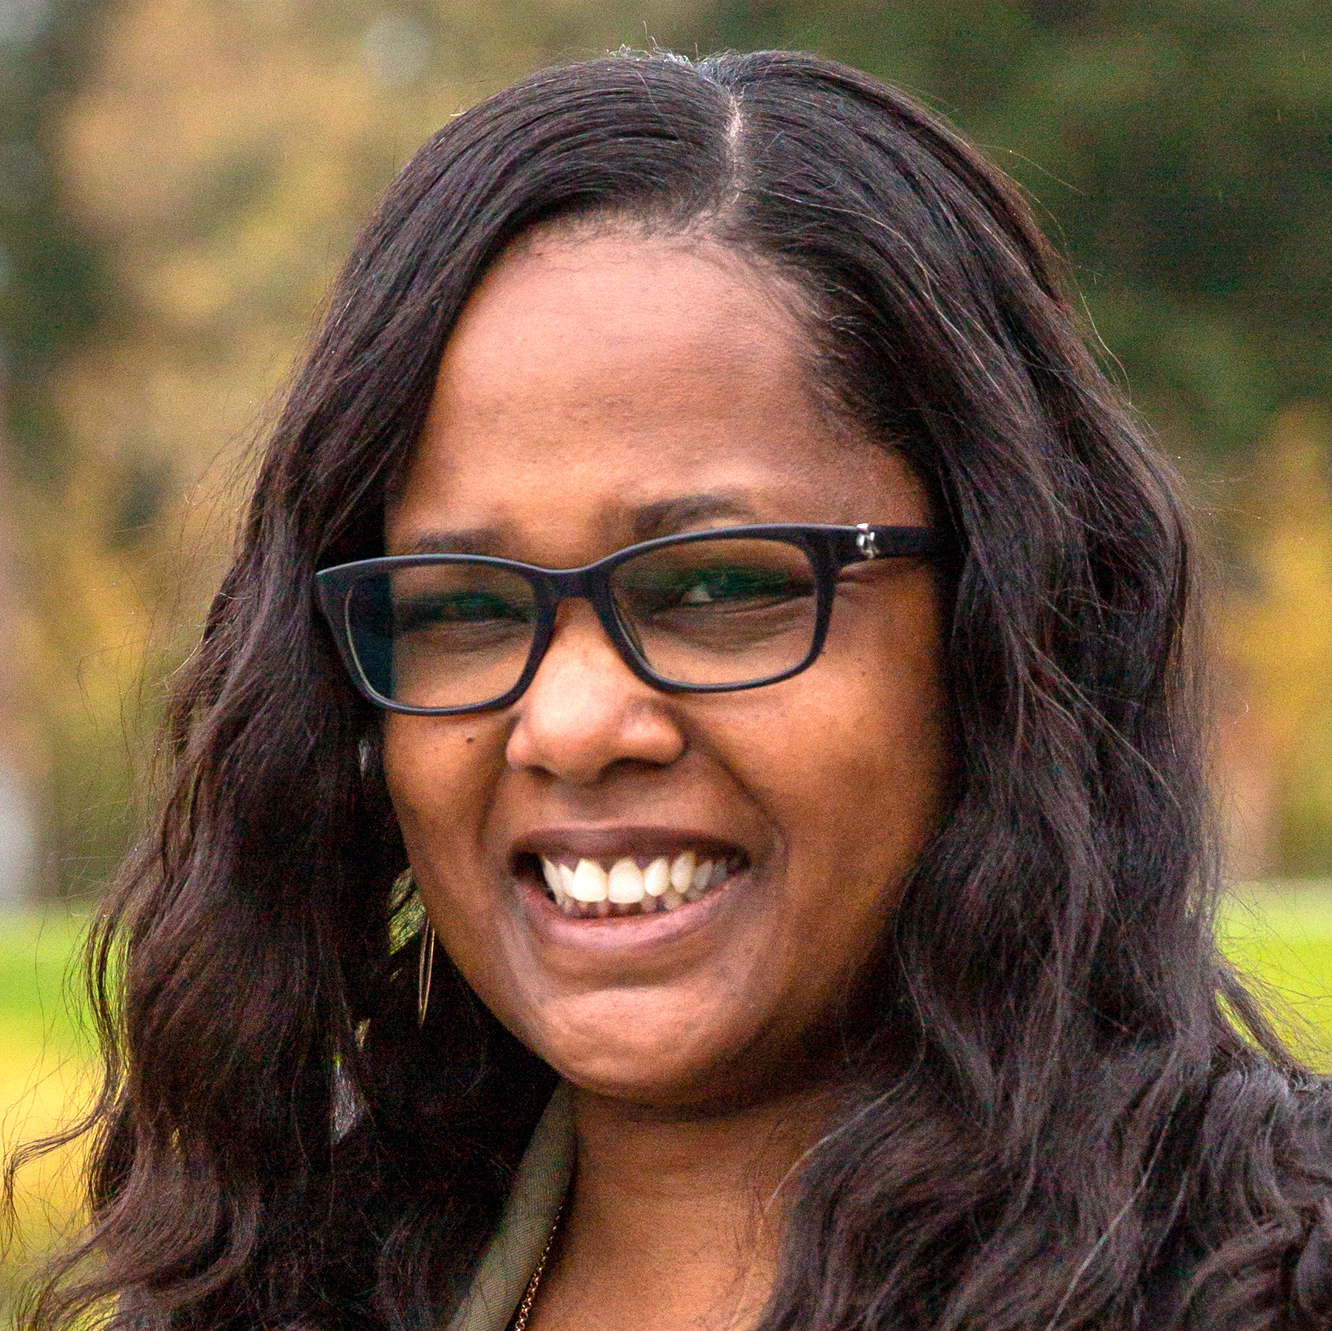 Janell Ephraim, chief equity officer, Vancouver Public Schools